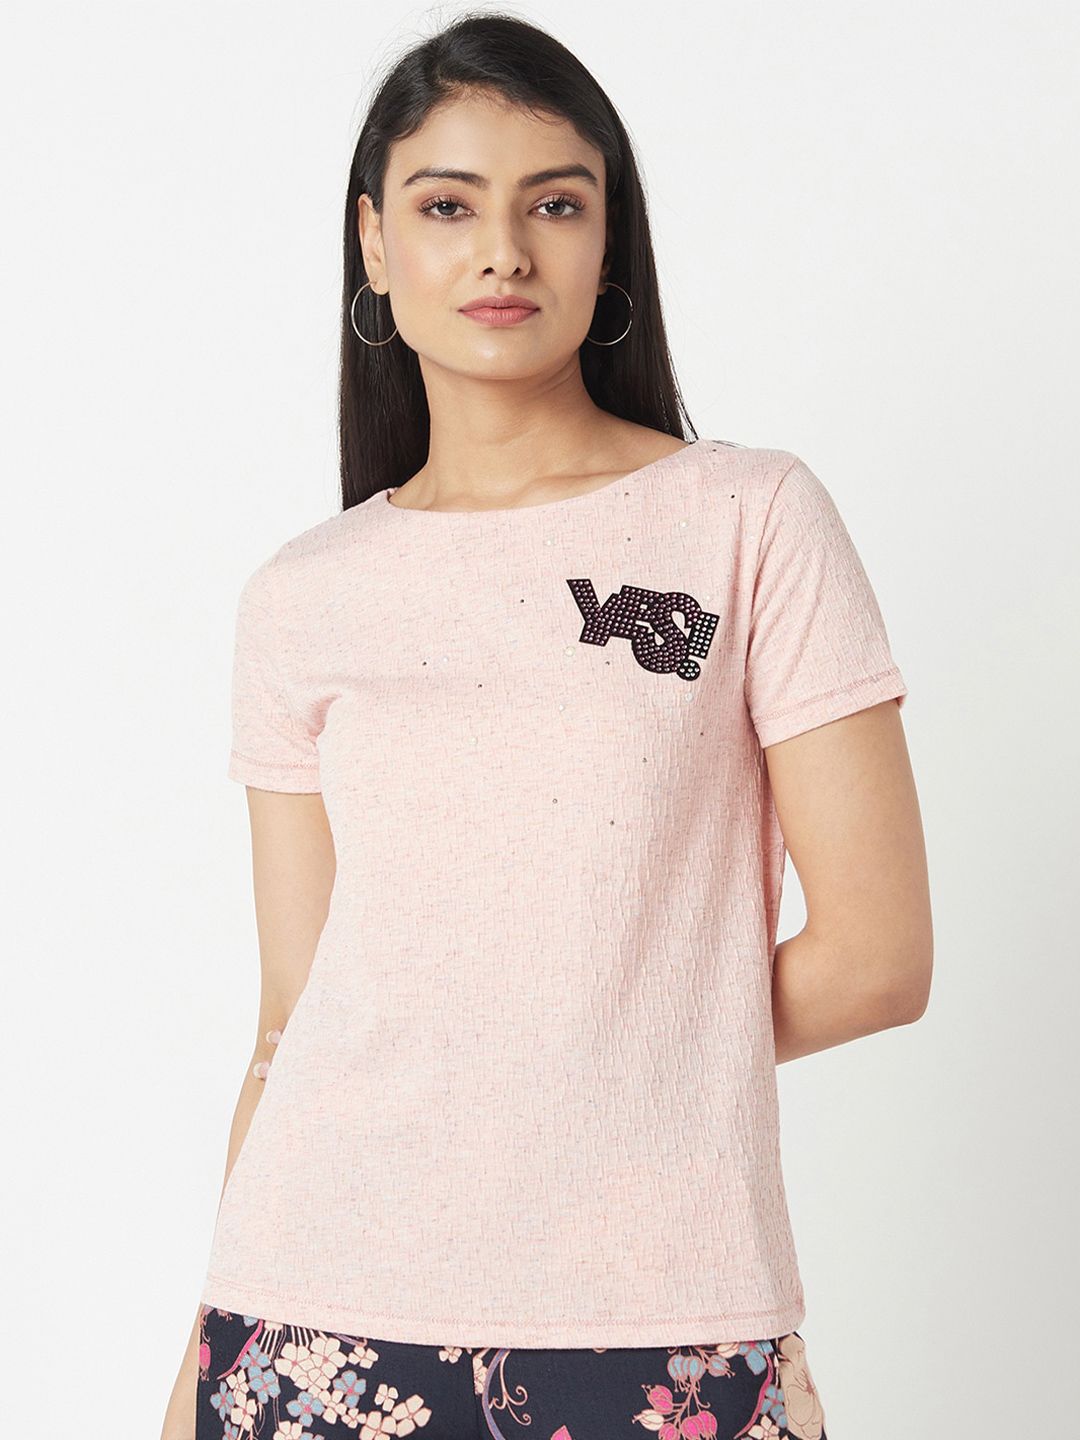 Miss Grace Embellished  Applique Top Price in India